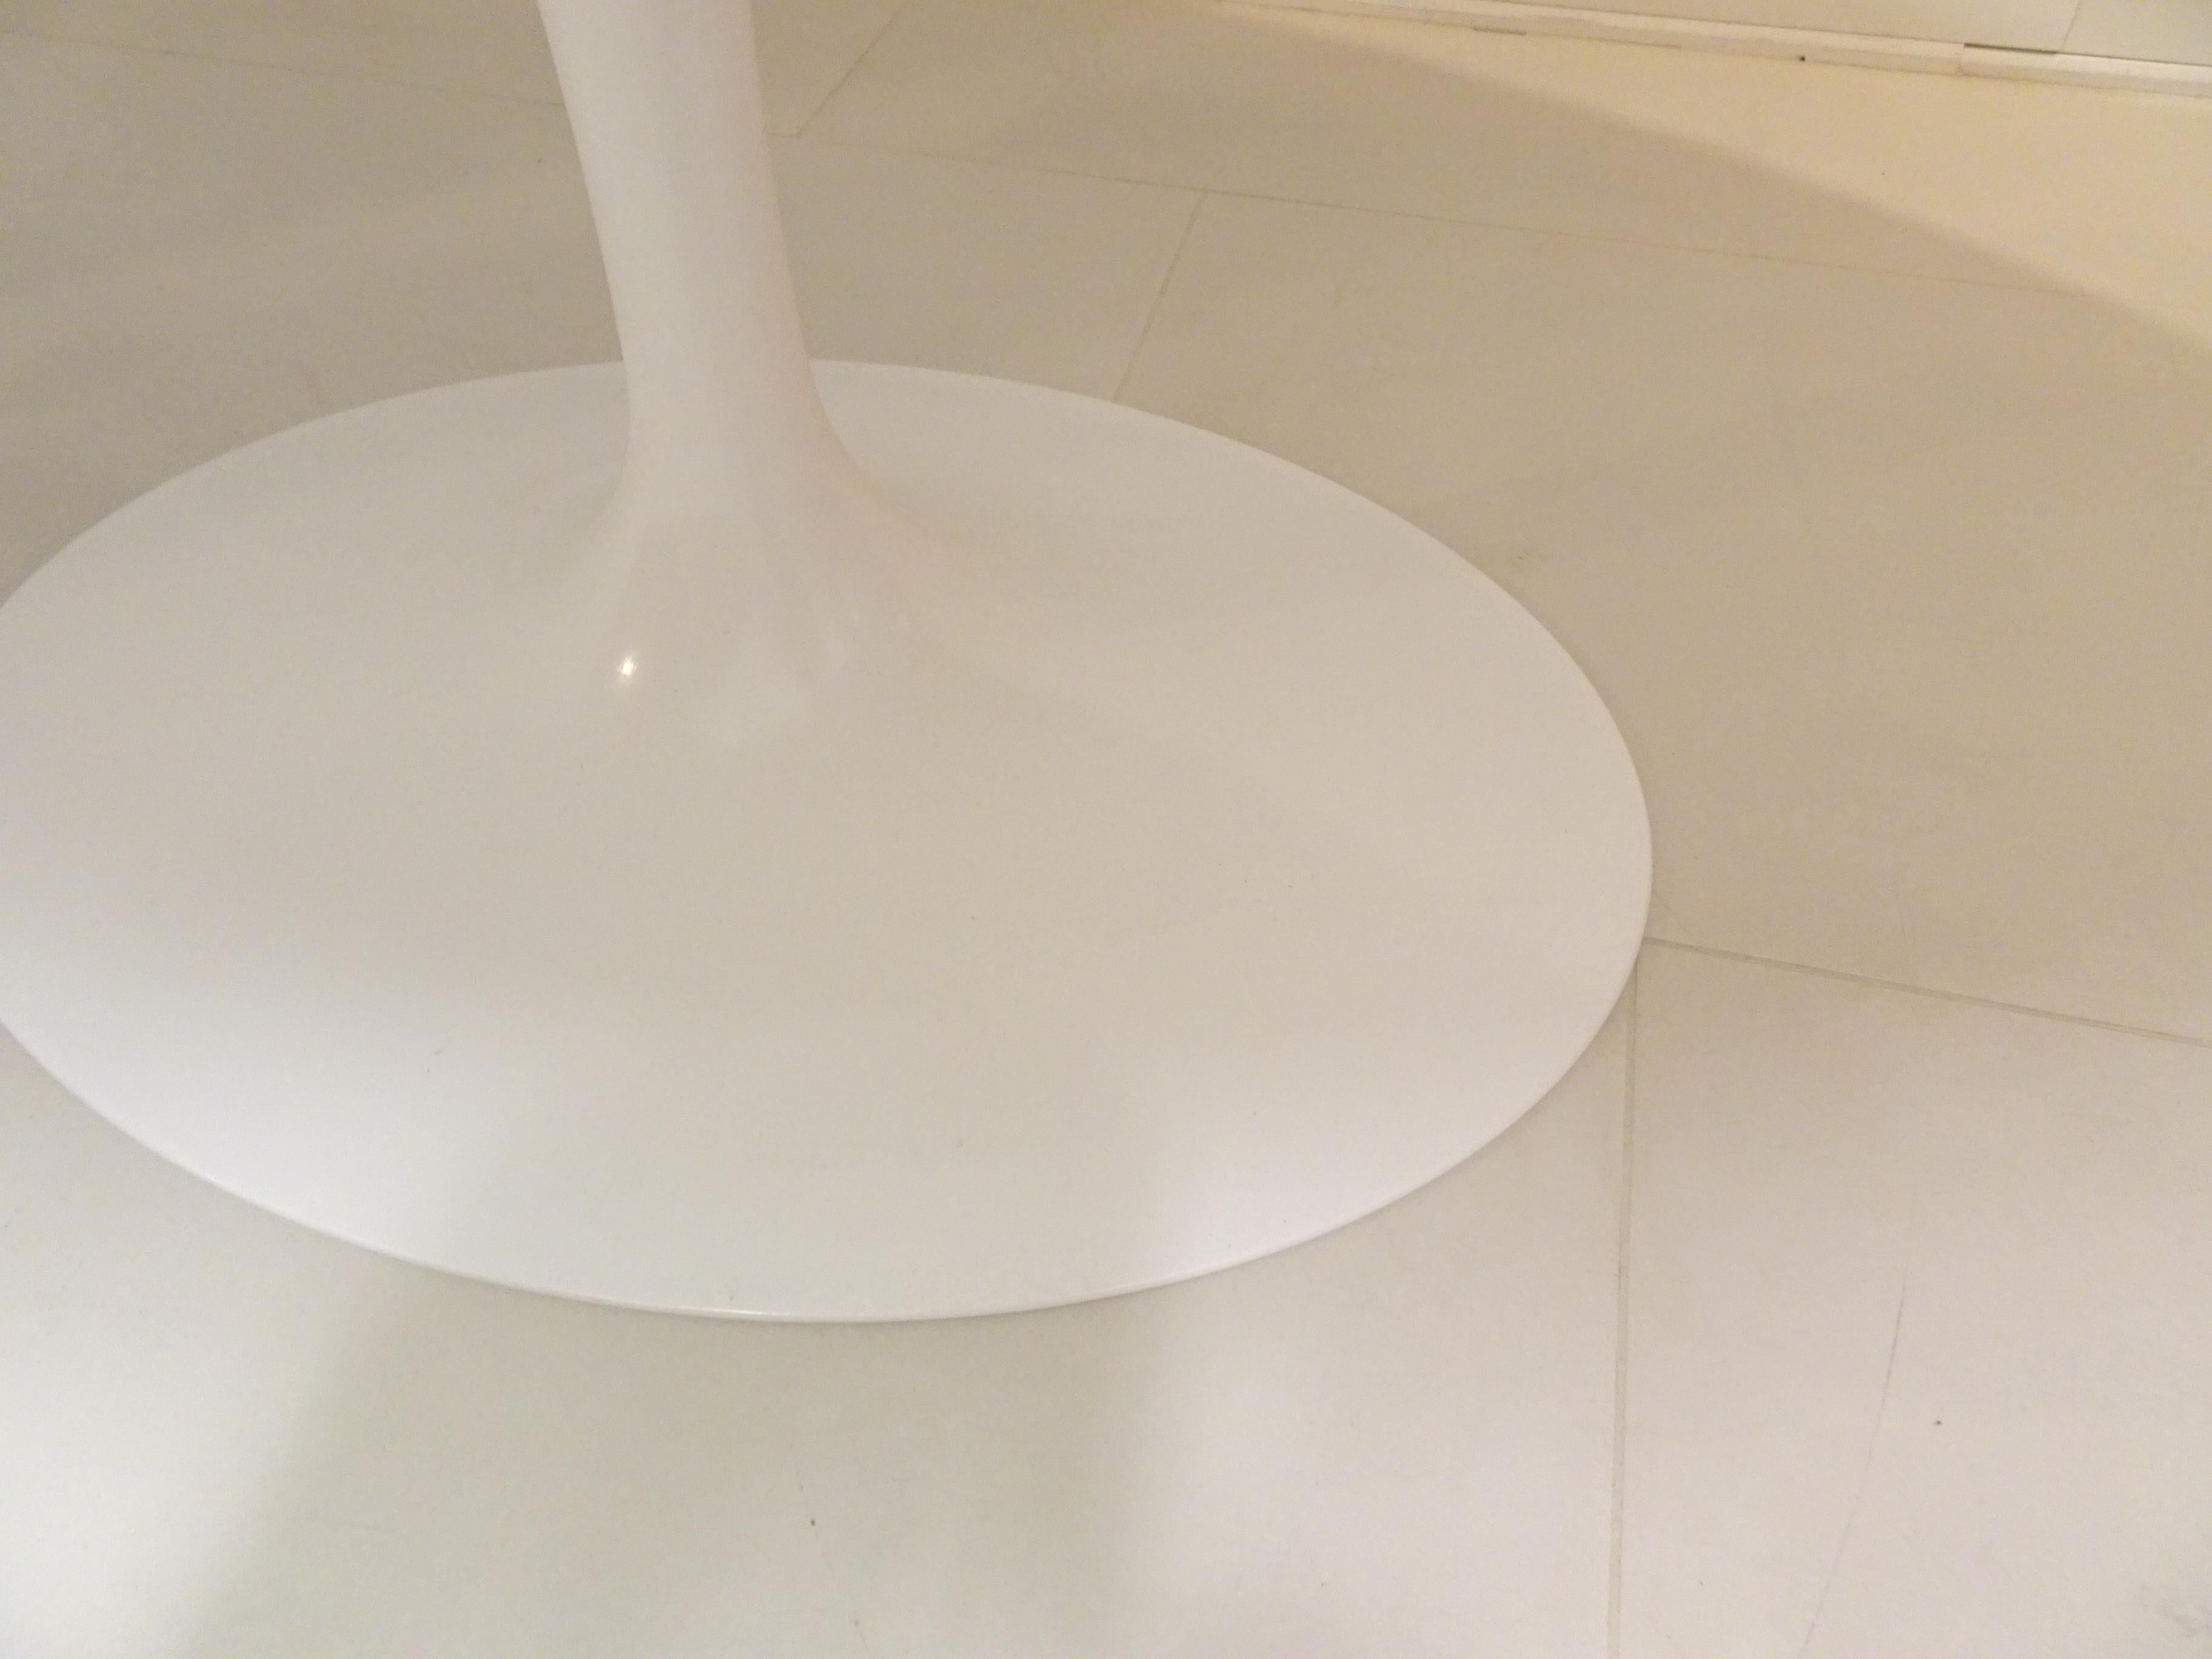 Oval tulip table by Eero Saarinen for Knoll. White marble of Carrara repoli to new. Very good condition.